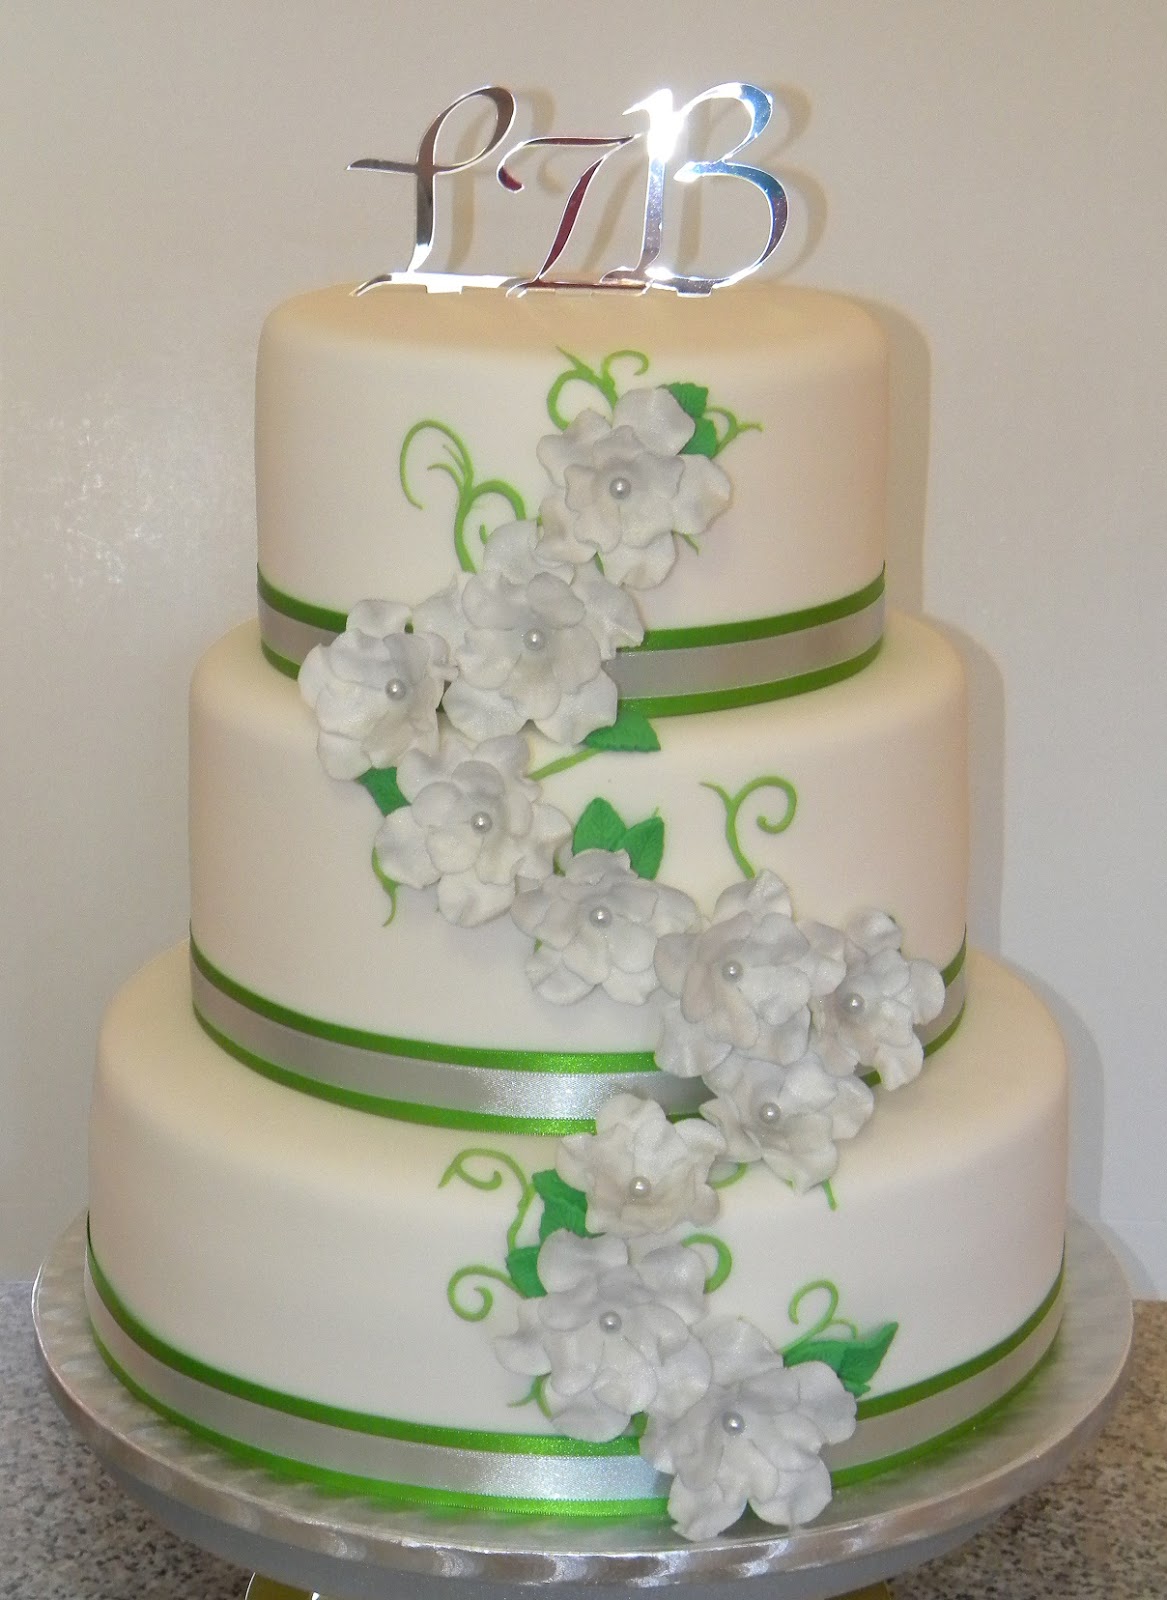 BITE ME CUPCAKES and WRAPPERS LIGHT GREEN & SILVER 3TIER